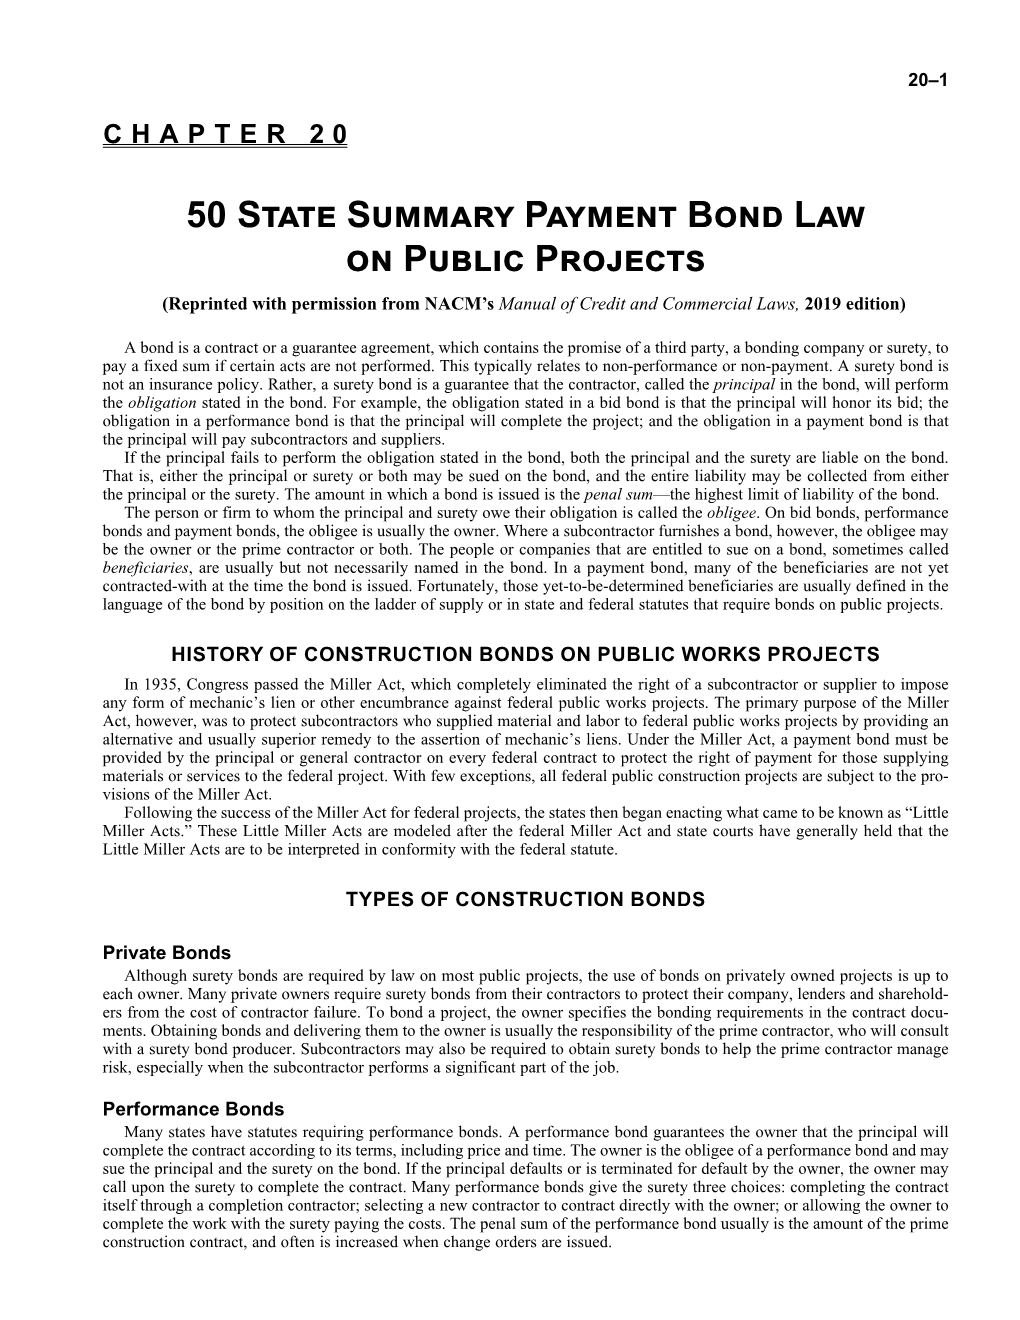 50 State Summary Payment Bond Law on Public Projects (Reprinted with Permission from NACM’S Manual of Credit and Commercial Laws, 2019 Edition)